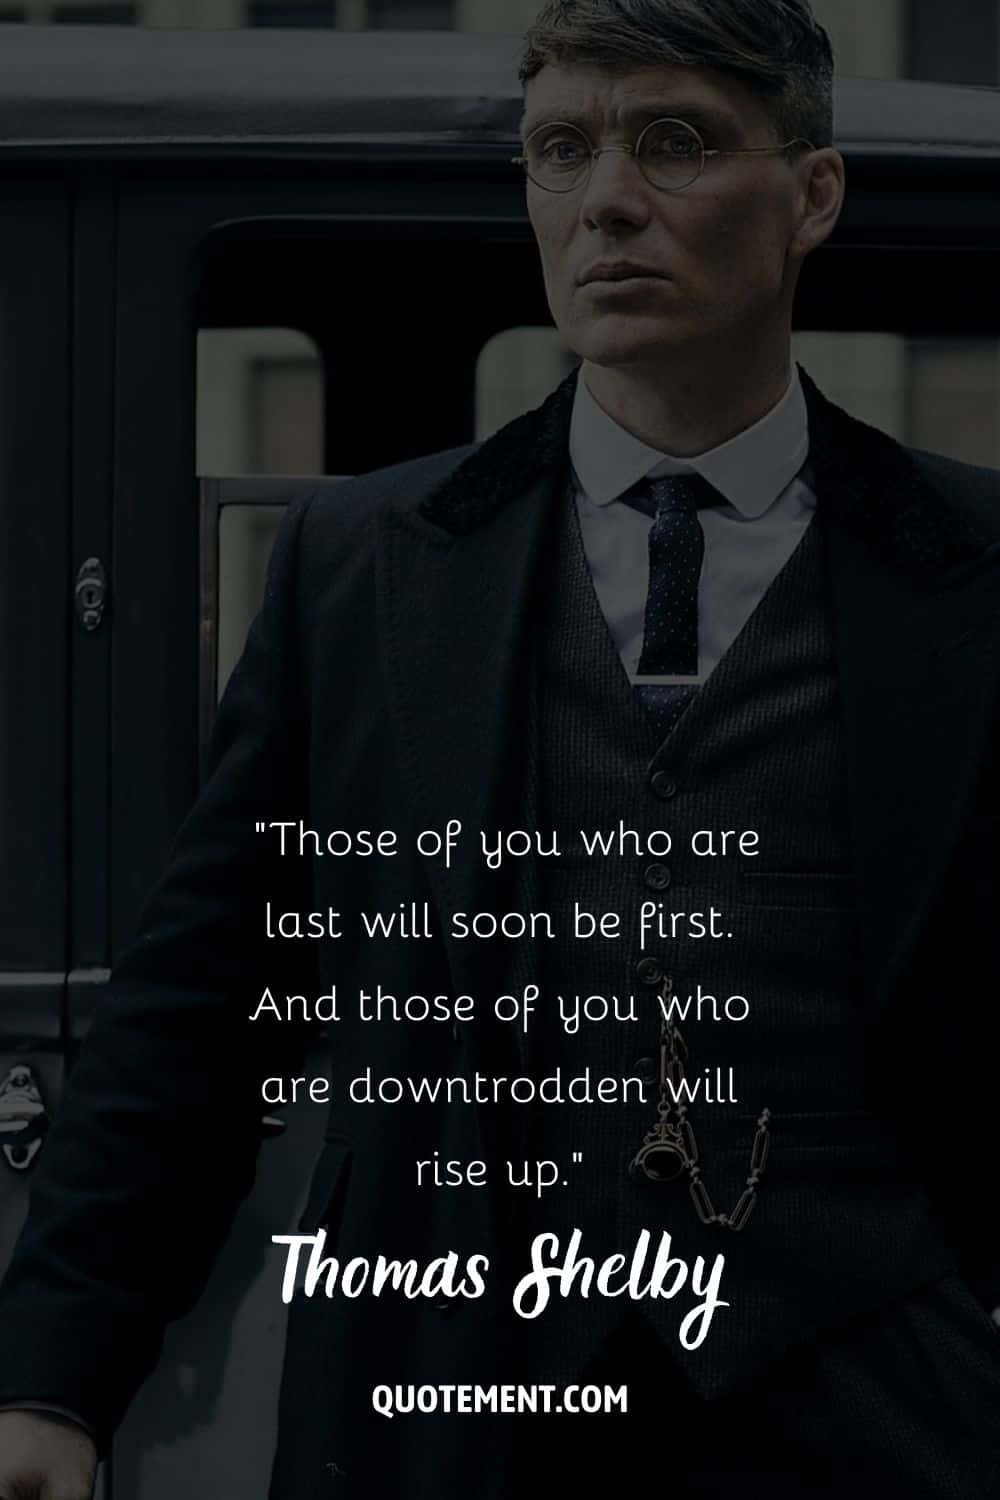 Cillian Murphy in a Peaky Blinder outfit representing motivation thomas shelby quote
